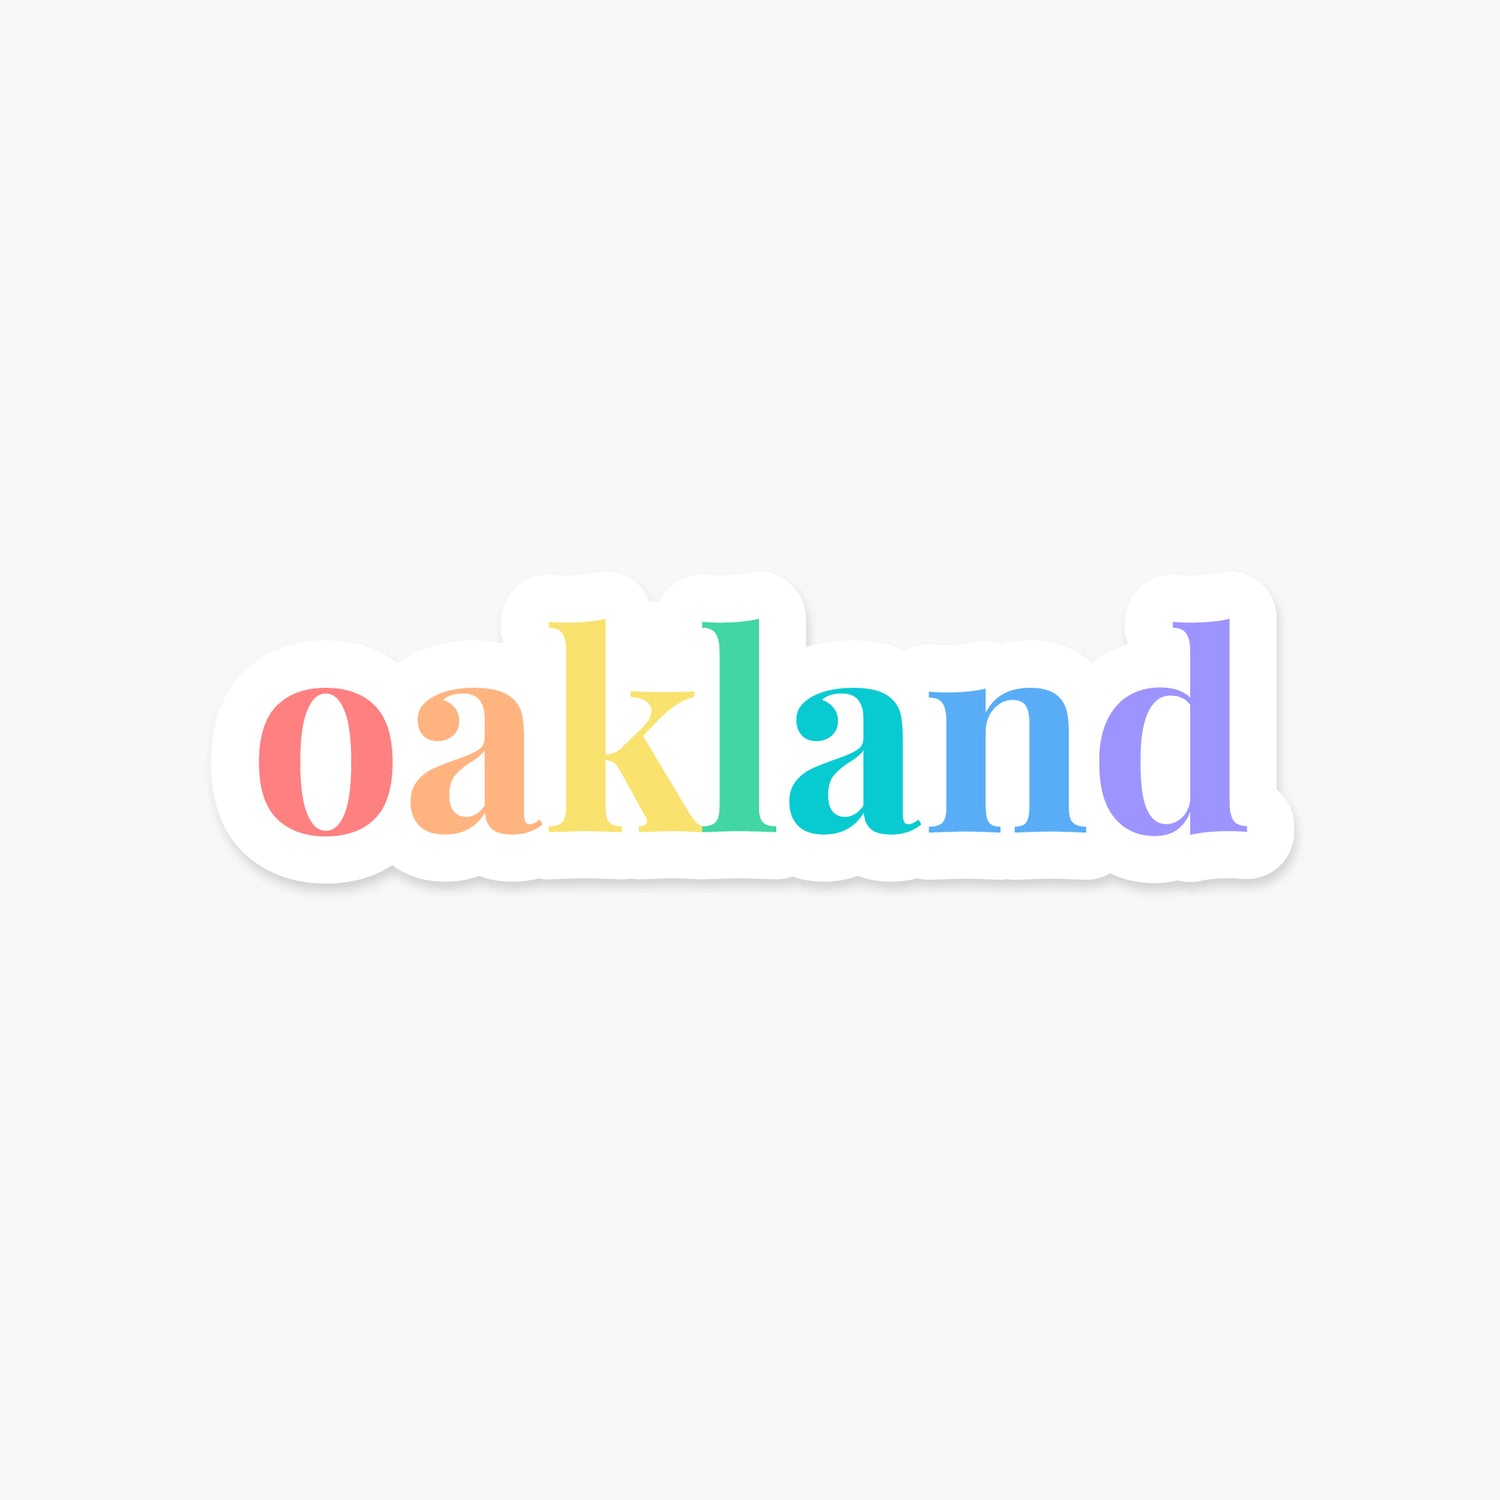 Oakland, California - Everyday Sticker | Footnotes Paper